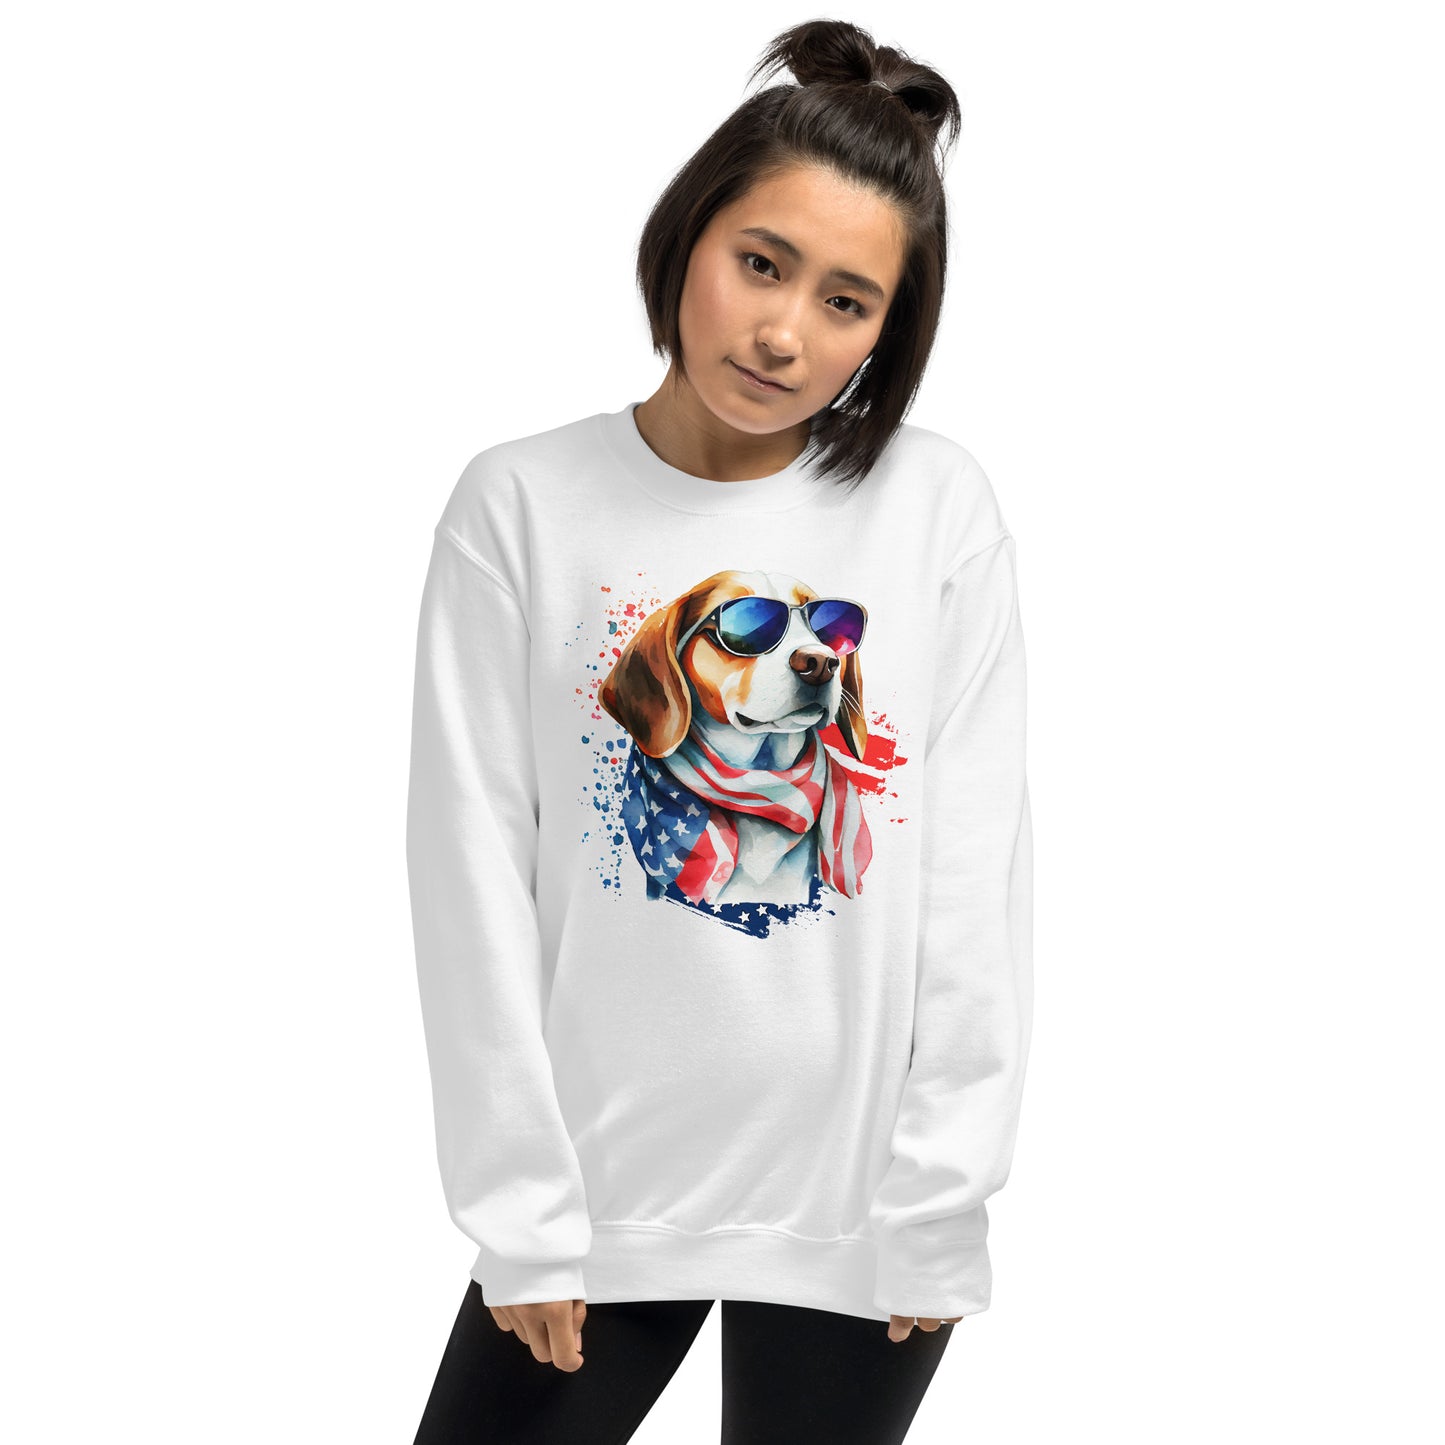 White Color Patriot Sweatshirt Printed With Patriotic Dog And USA Colors